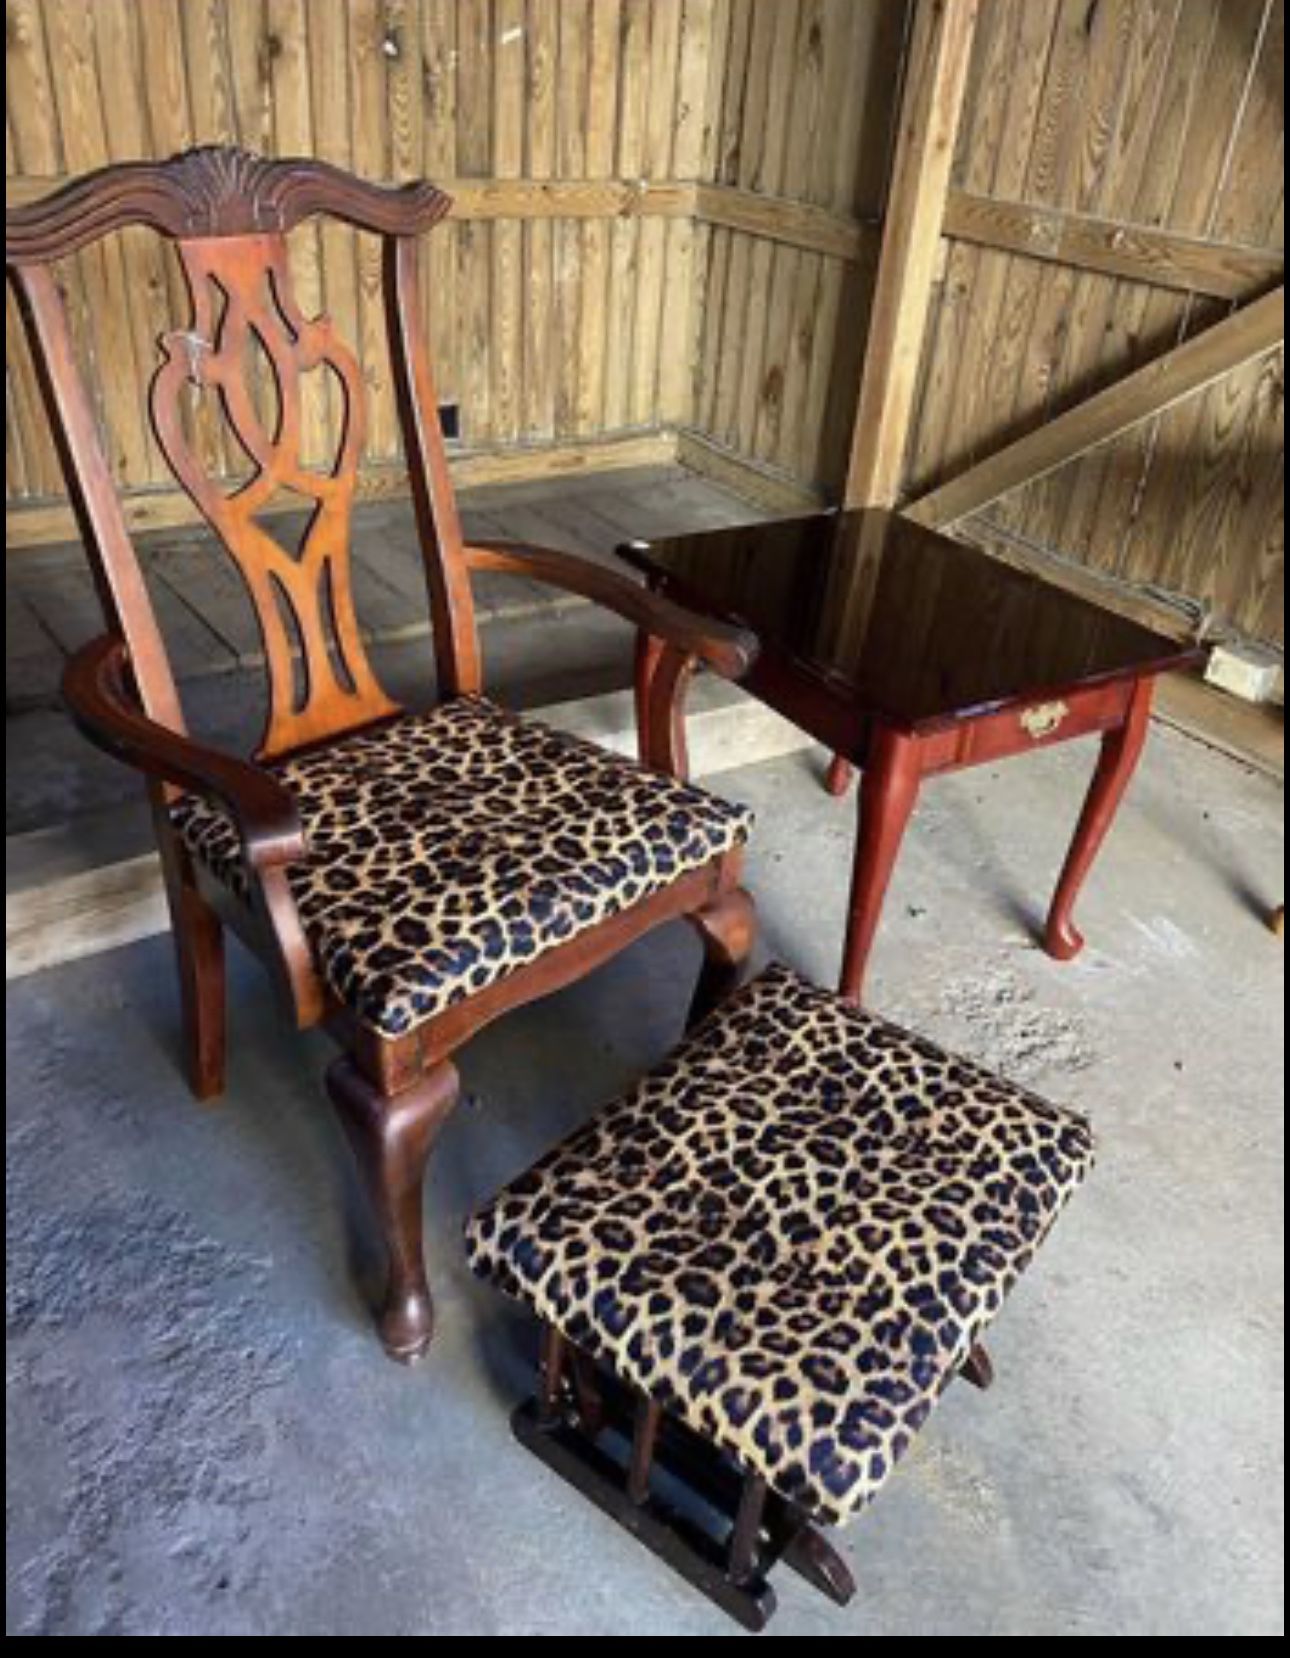 Wooden cheetah chair with a rocking step stool